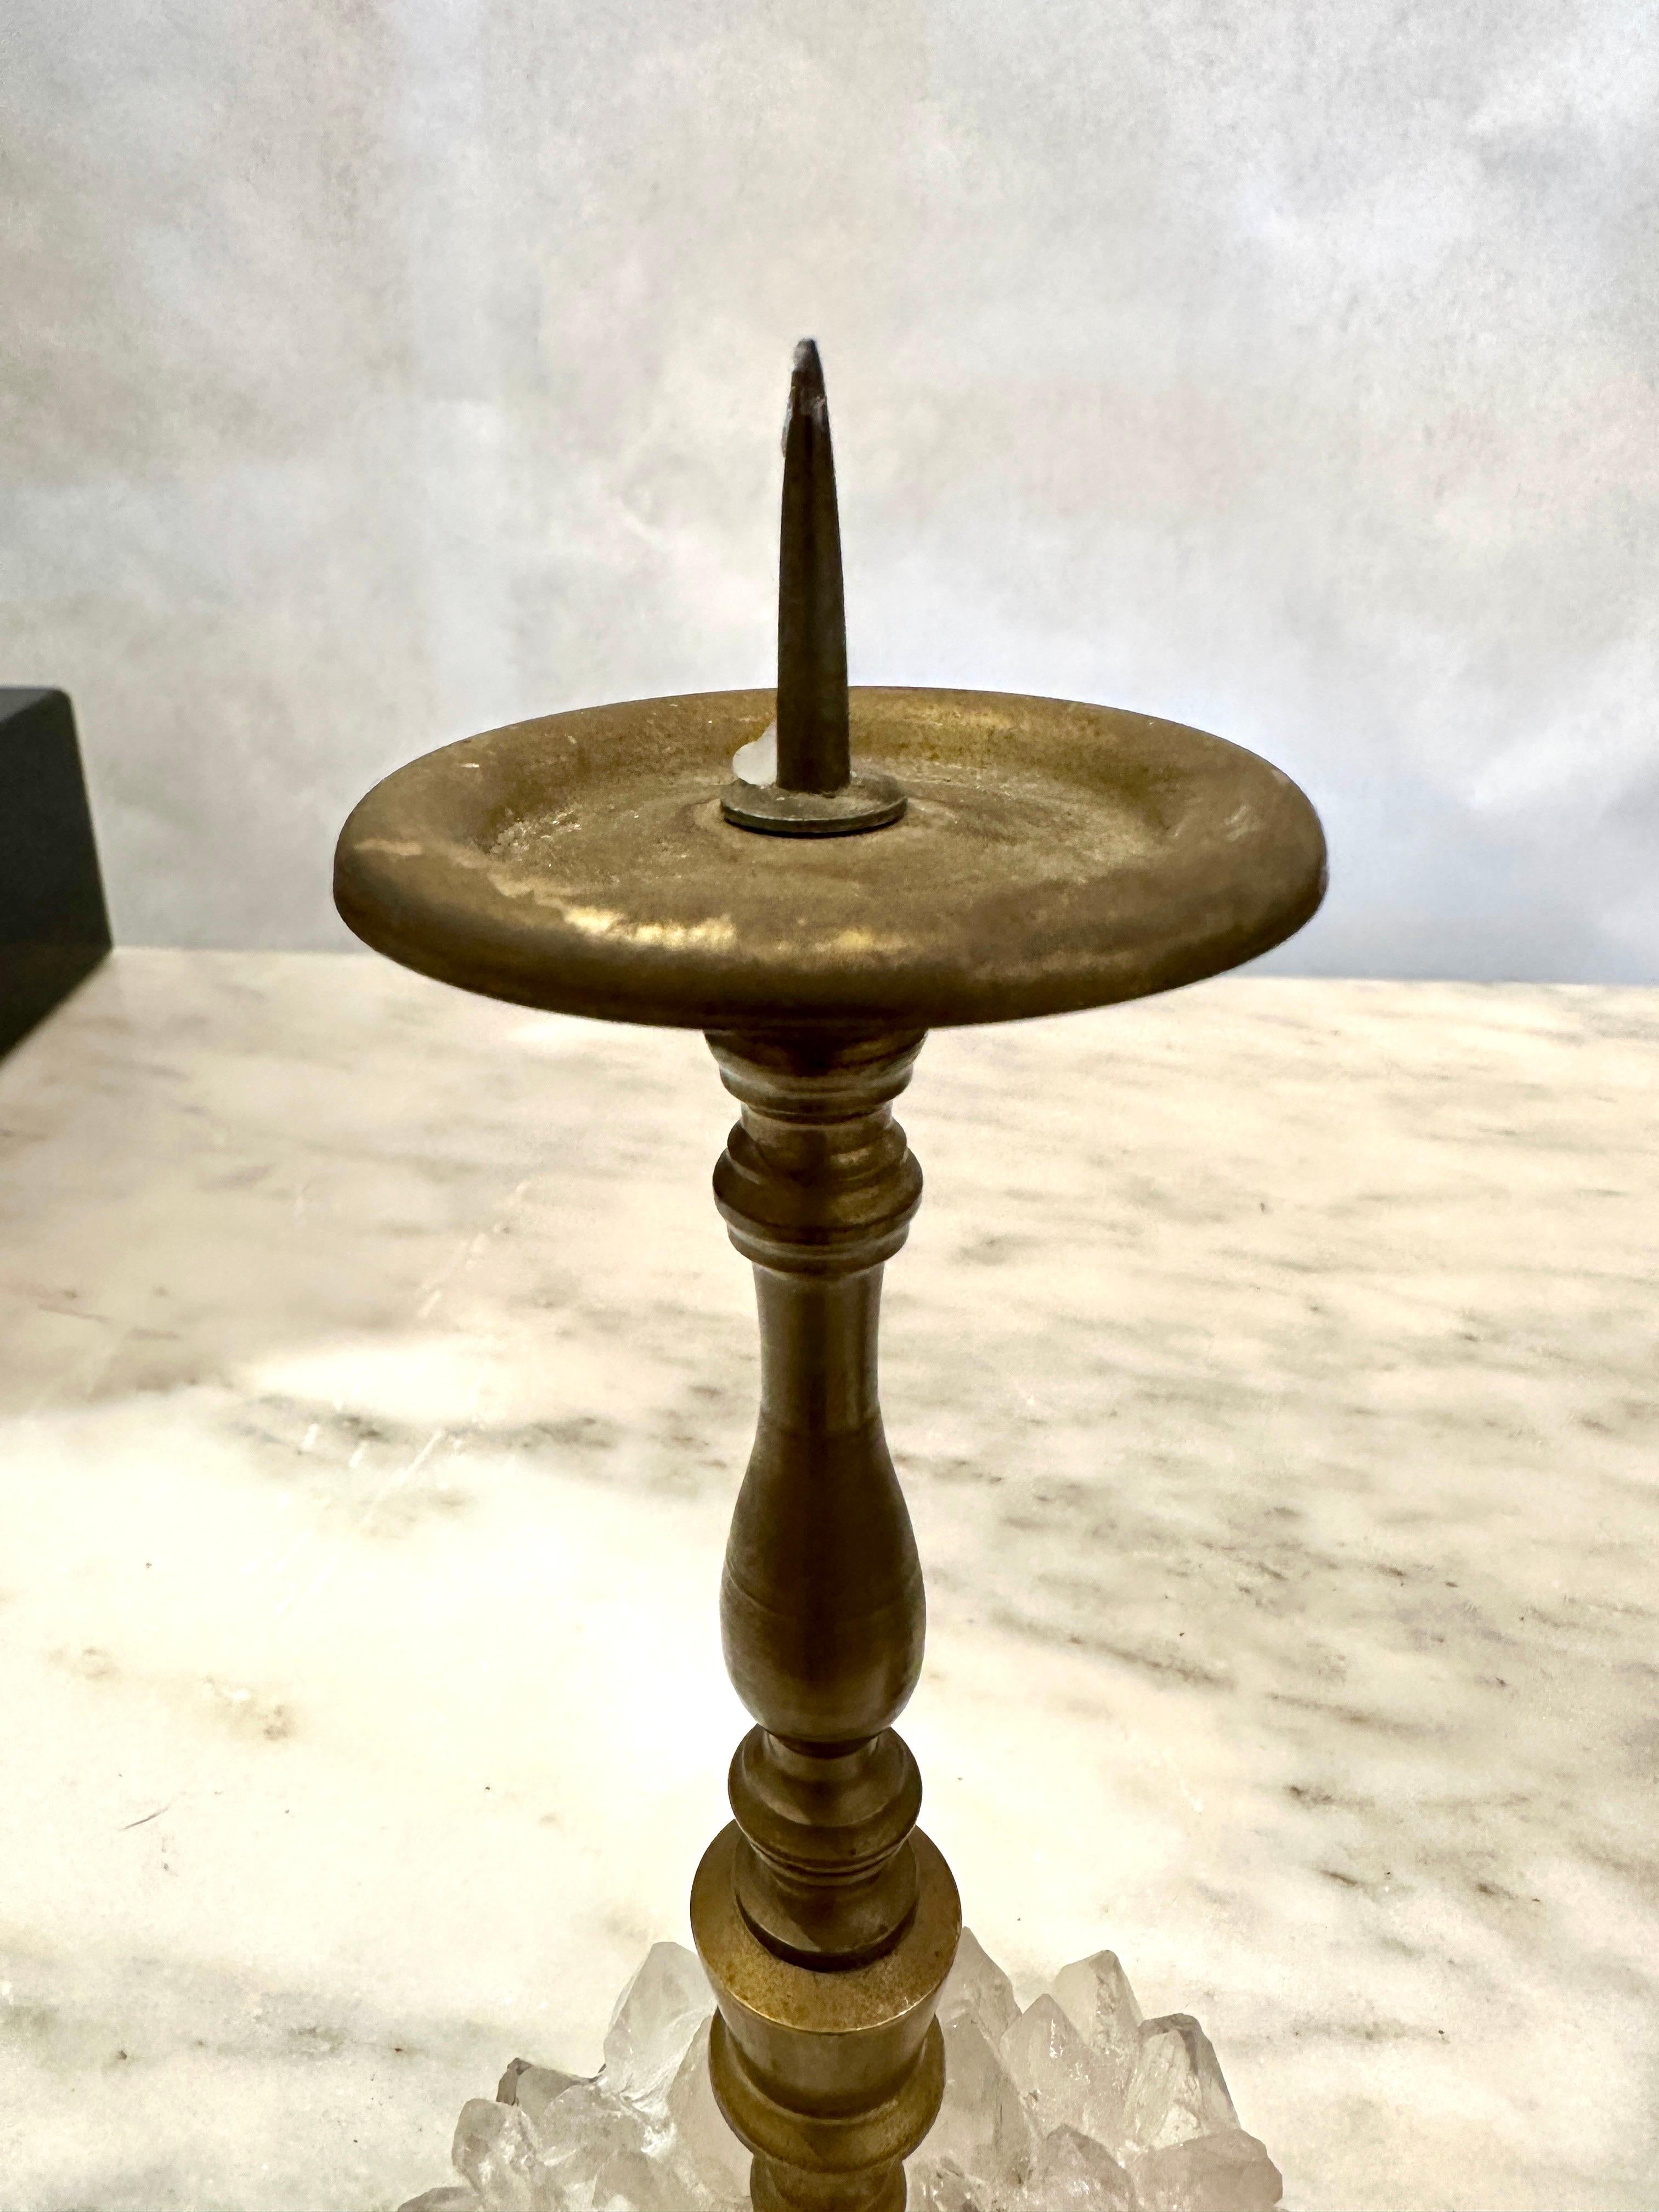 Beautiful dark patina and signs of age and use for these beautiful and uniquely adorned bronze candleholders with rock crystal embellishments to the bases.  Great craftsmanship and highly decorative.